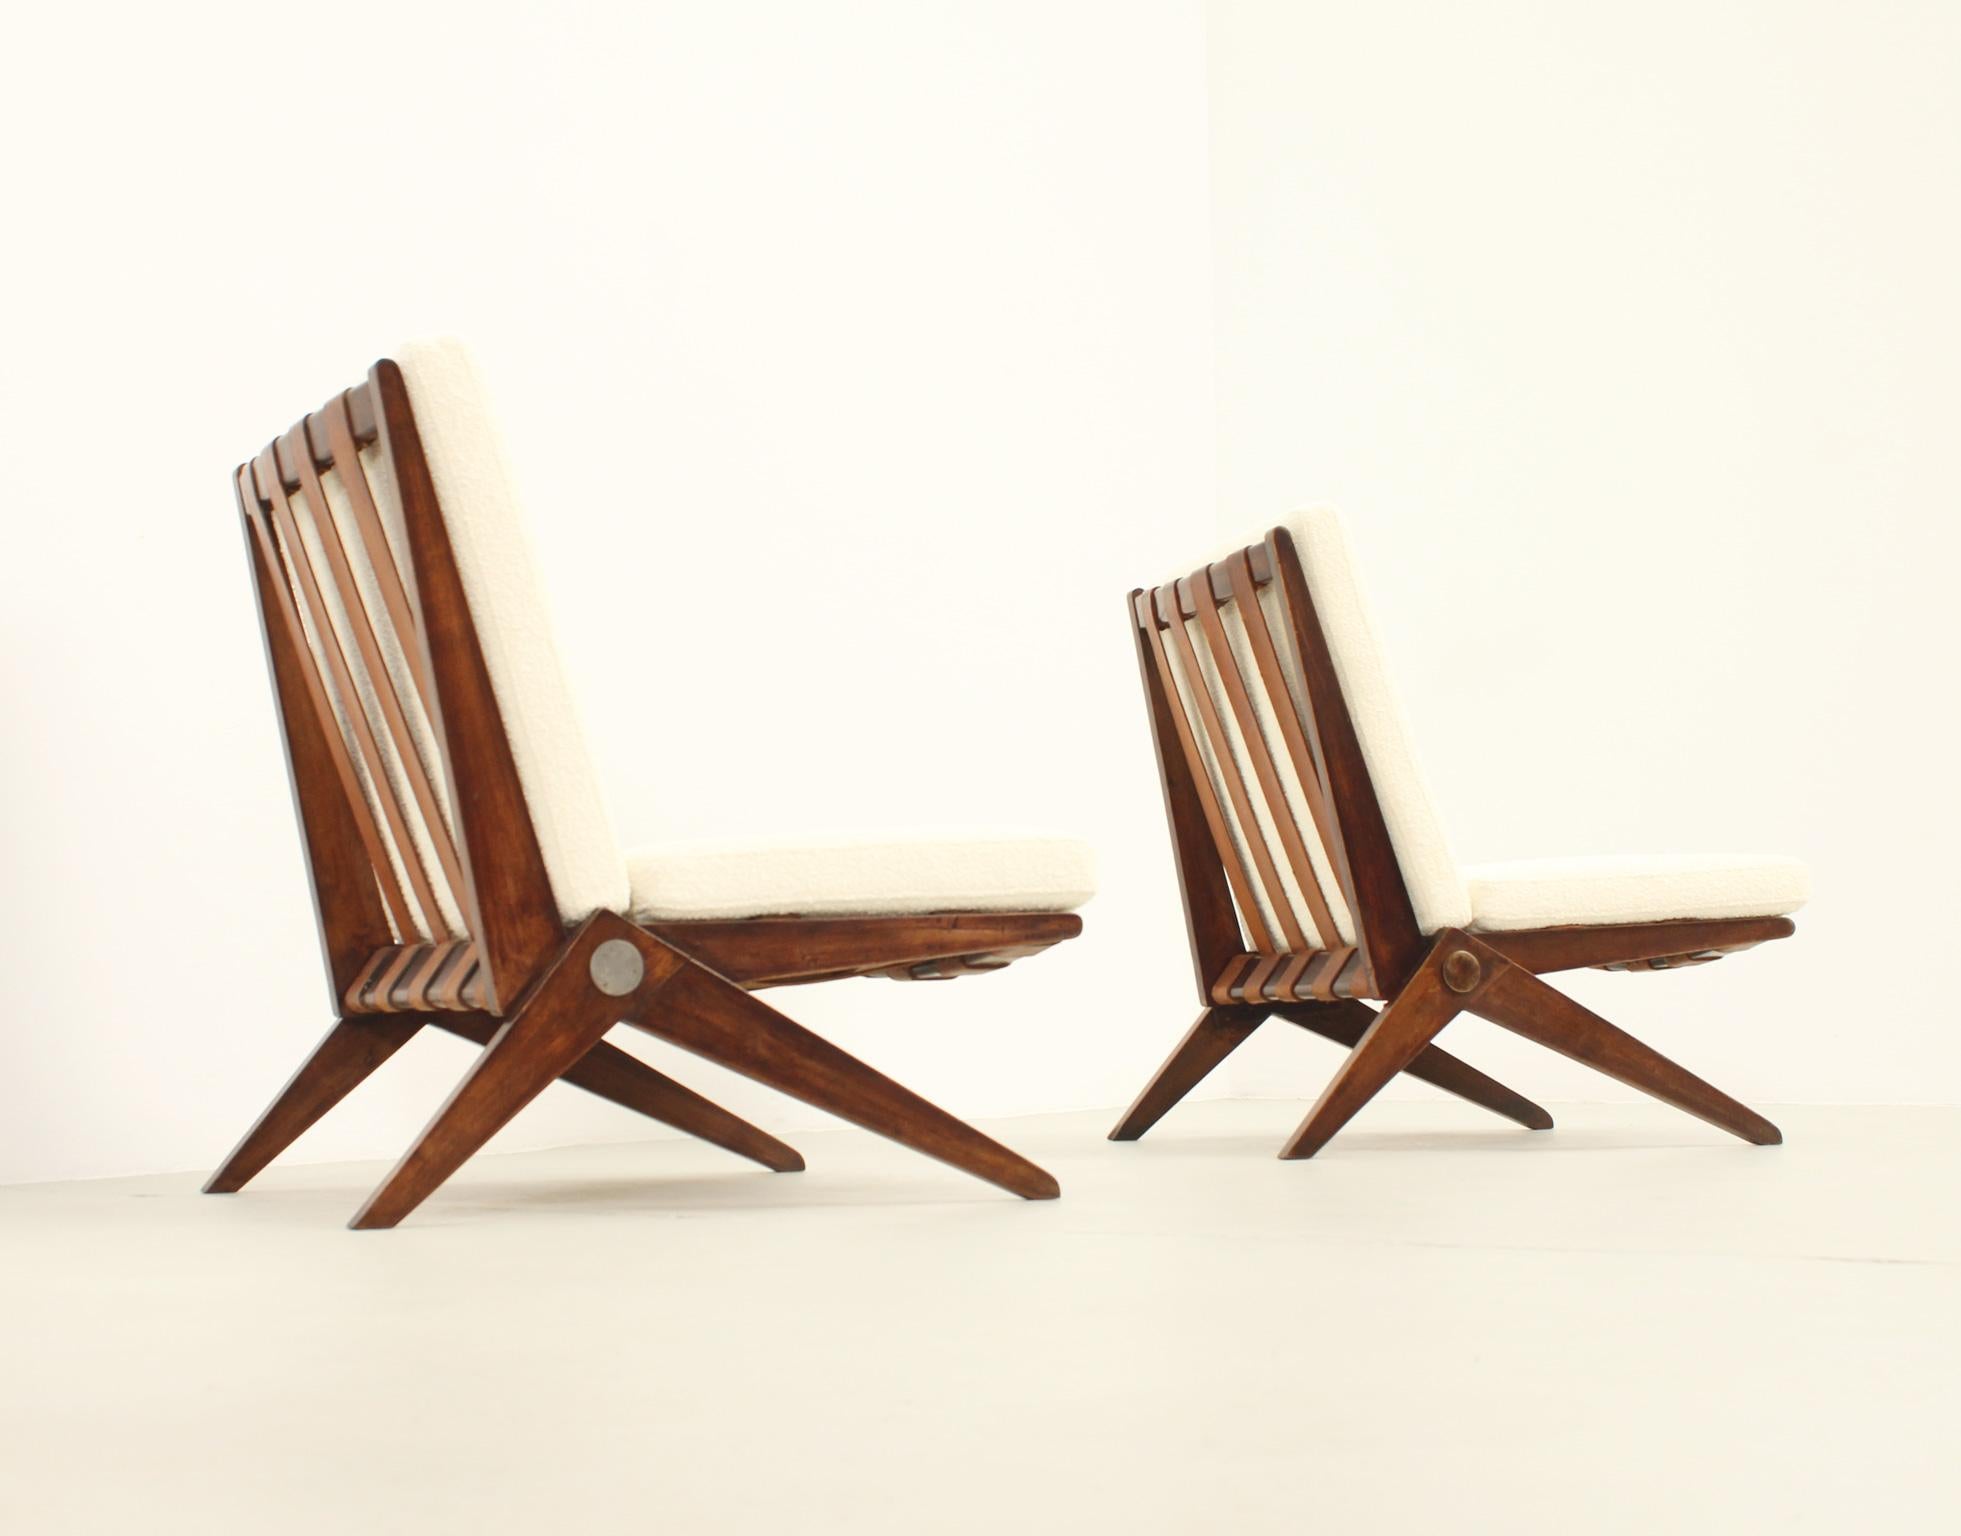 Pair of Scissors chairs designed by Pierre Jeanneret in 1948 and produced by Knoll International from 1948 to 1966. Early edition in stained maple wood with leather straps and new cushions upholstered with Bisson Bruneel fabric.